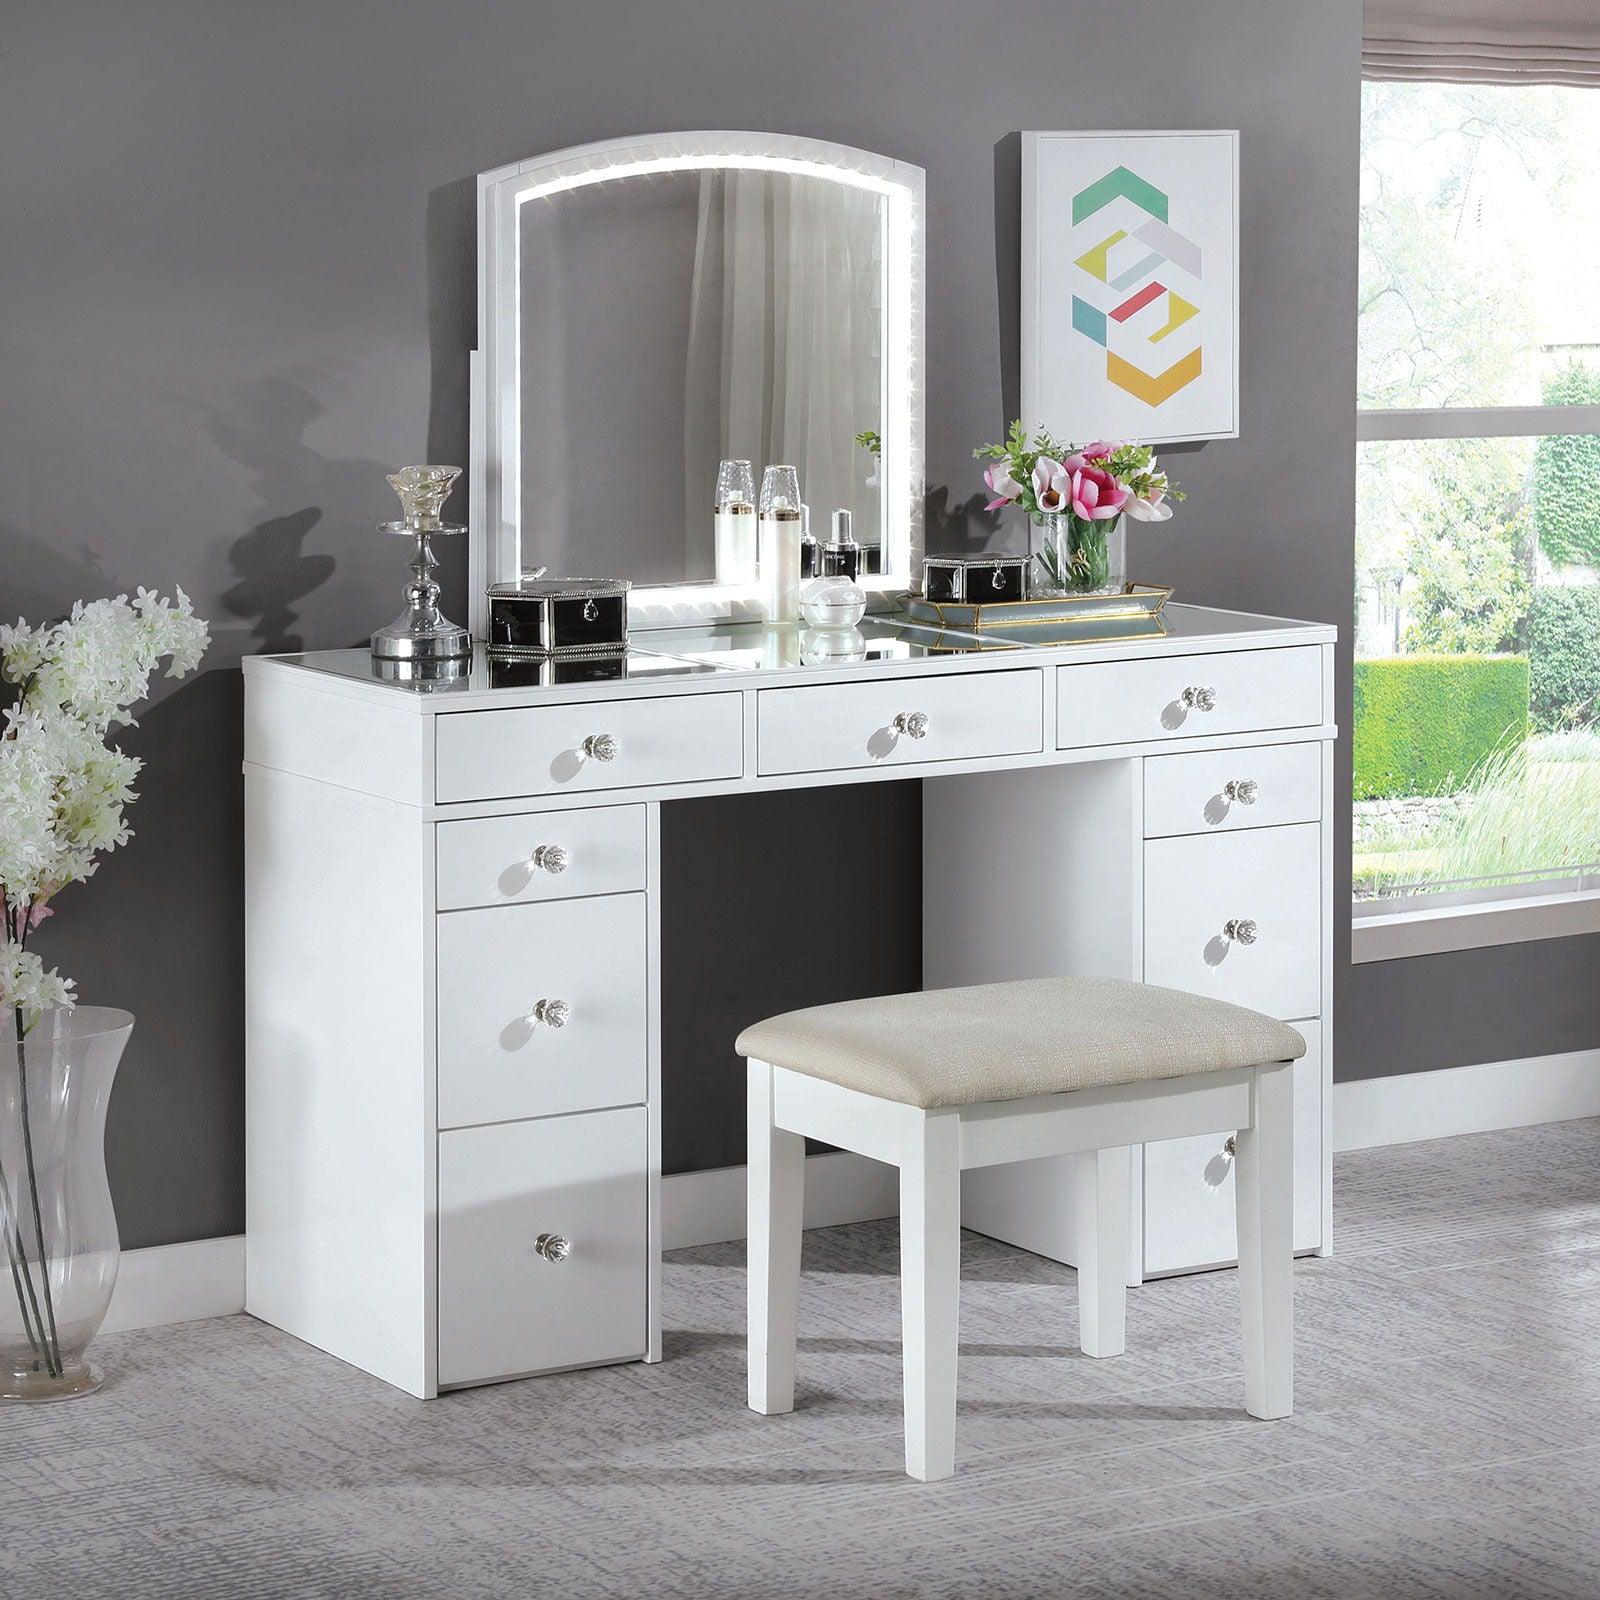 Furniture of America - Louise - Vanity With Stool - White - 5th Avenue Furniture